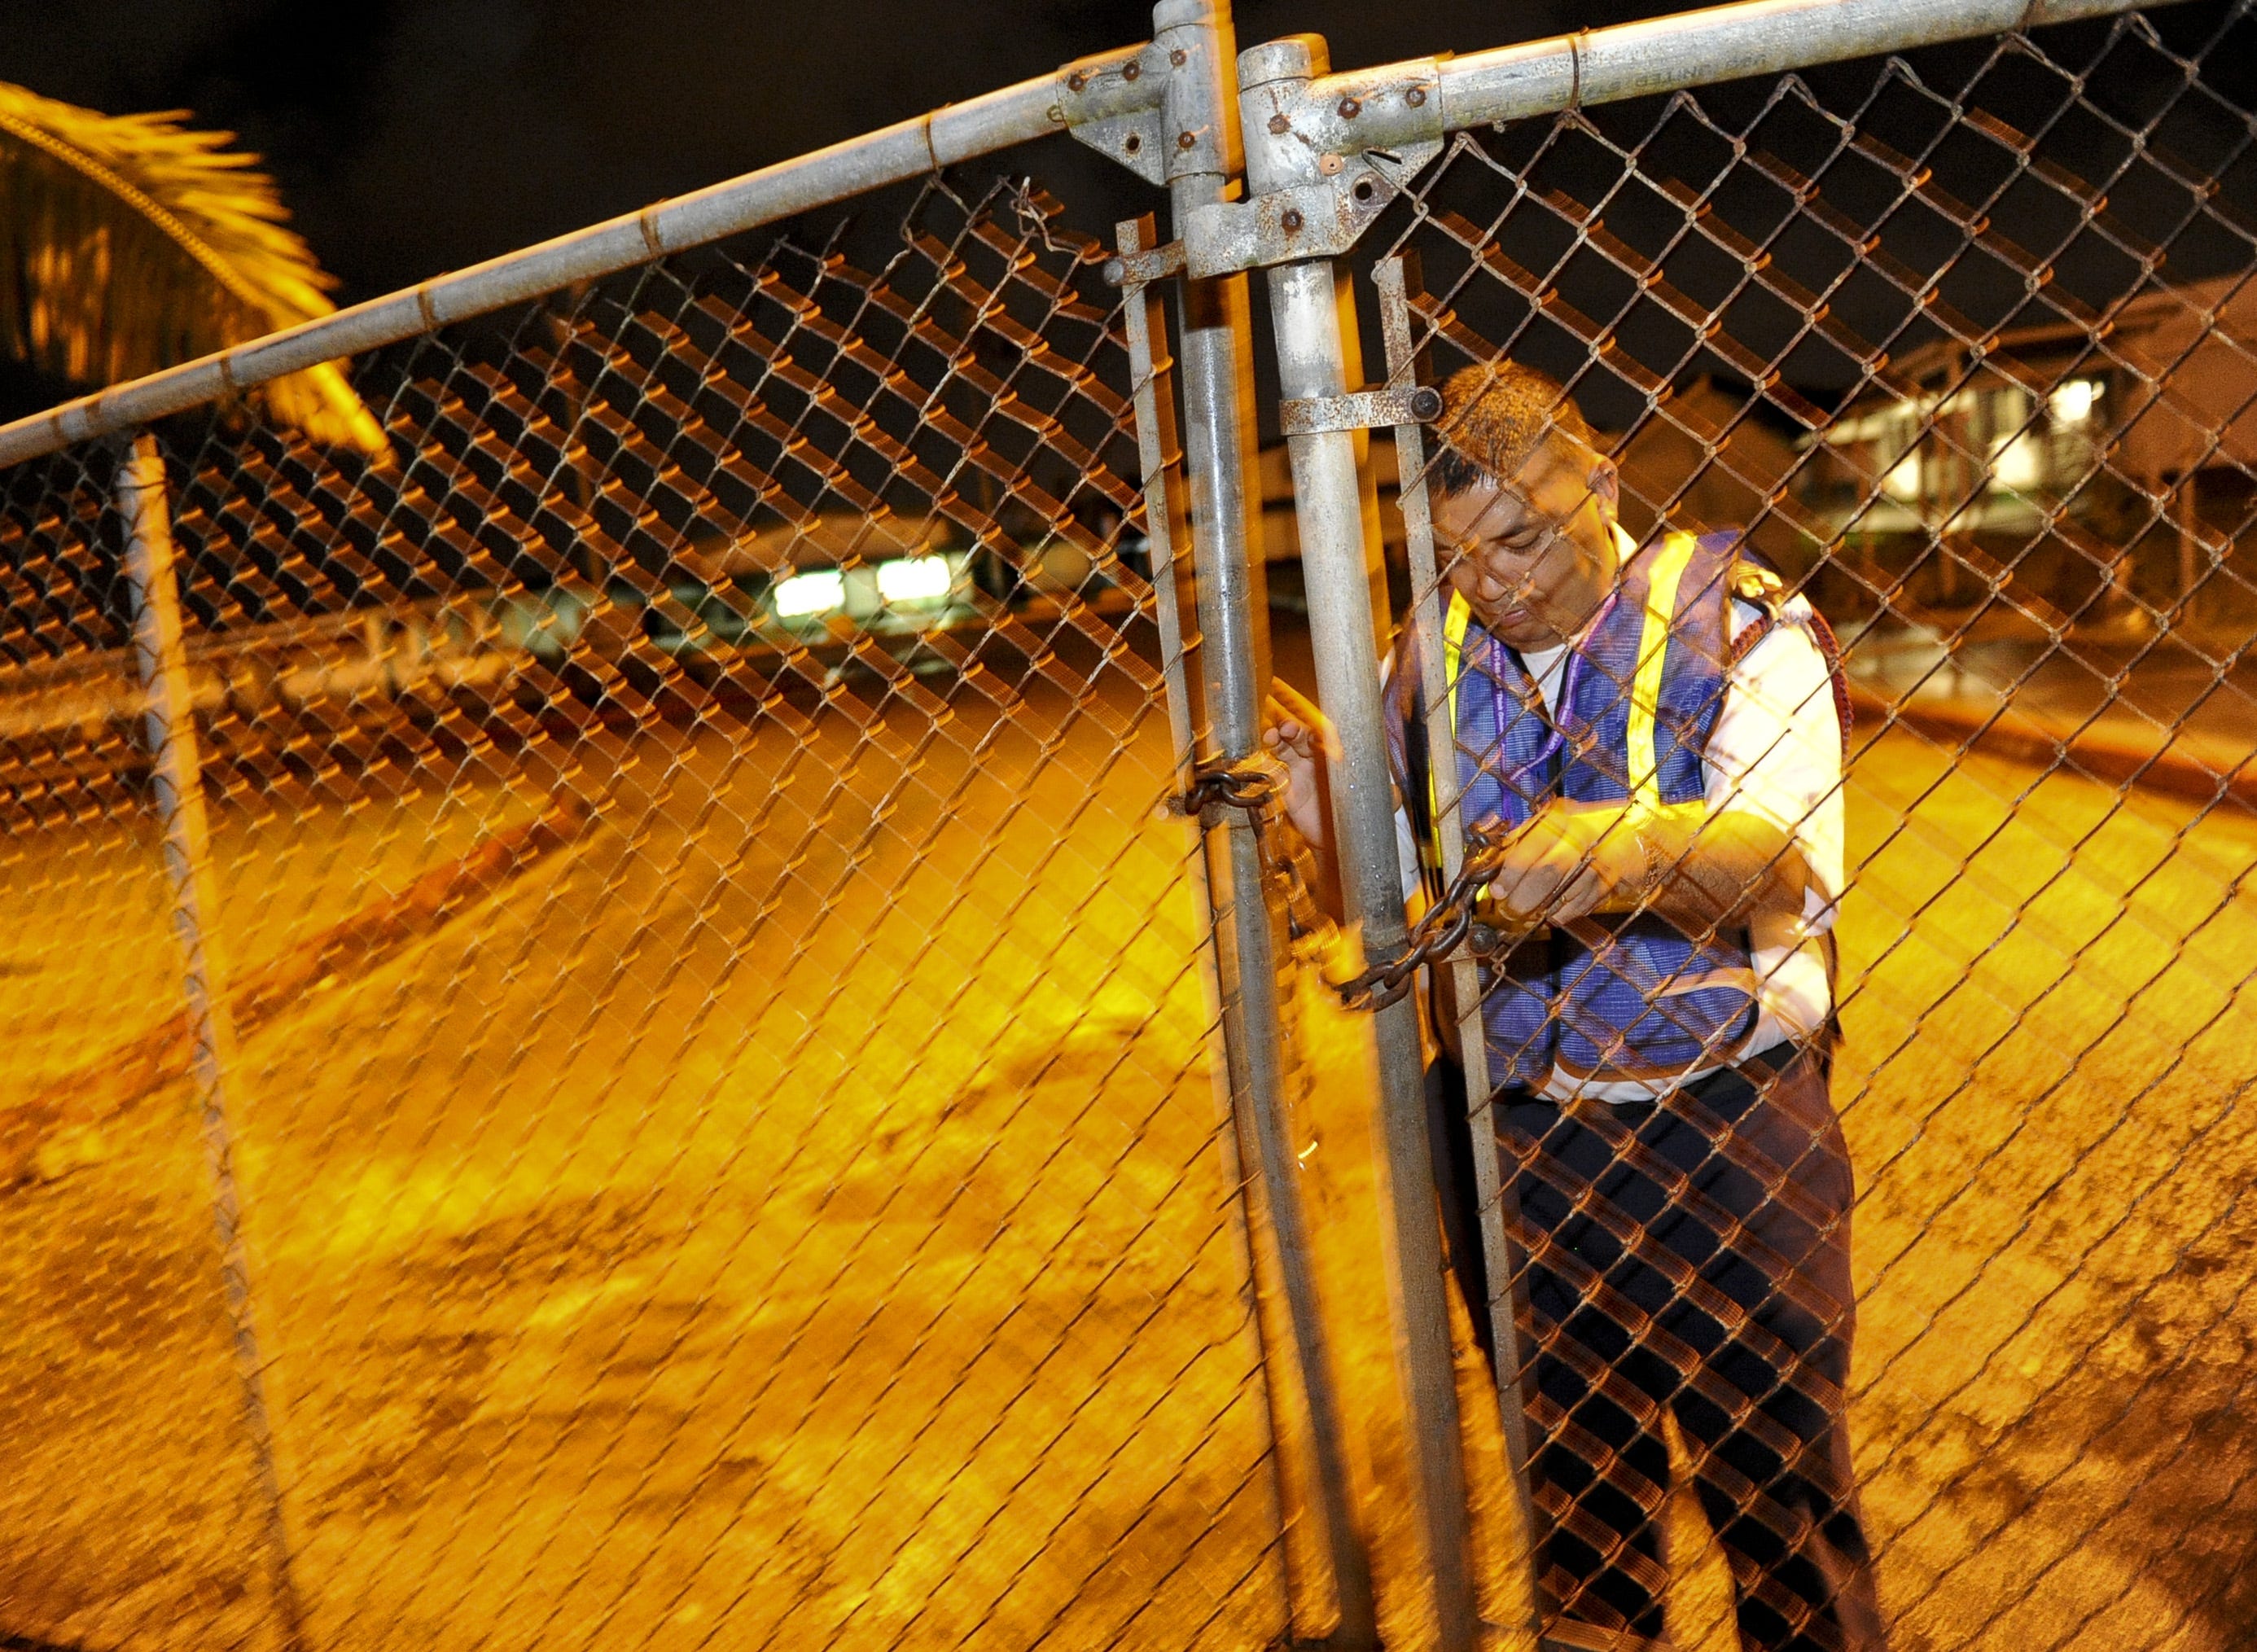 A G4S Jeff Toves uses a chain and padlock to secure the main gate to Maria A. Ulloa Elementary School in Dededo during the early morning hours of Dec. 27.